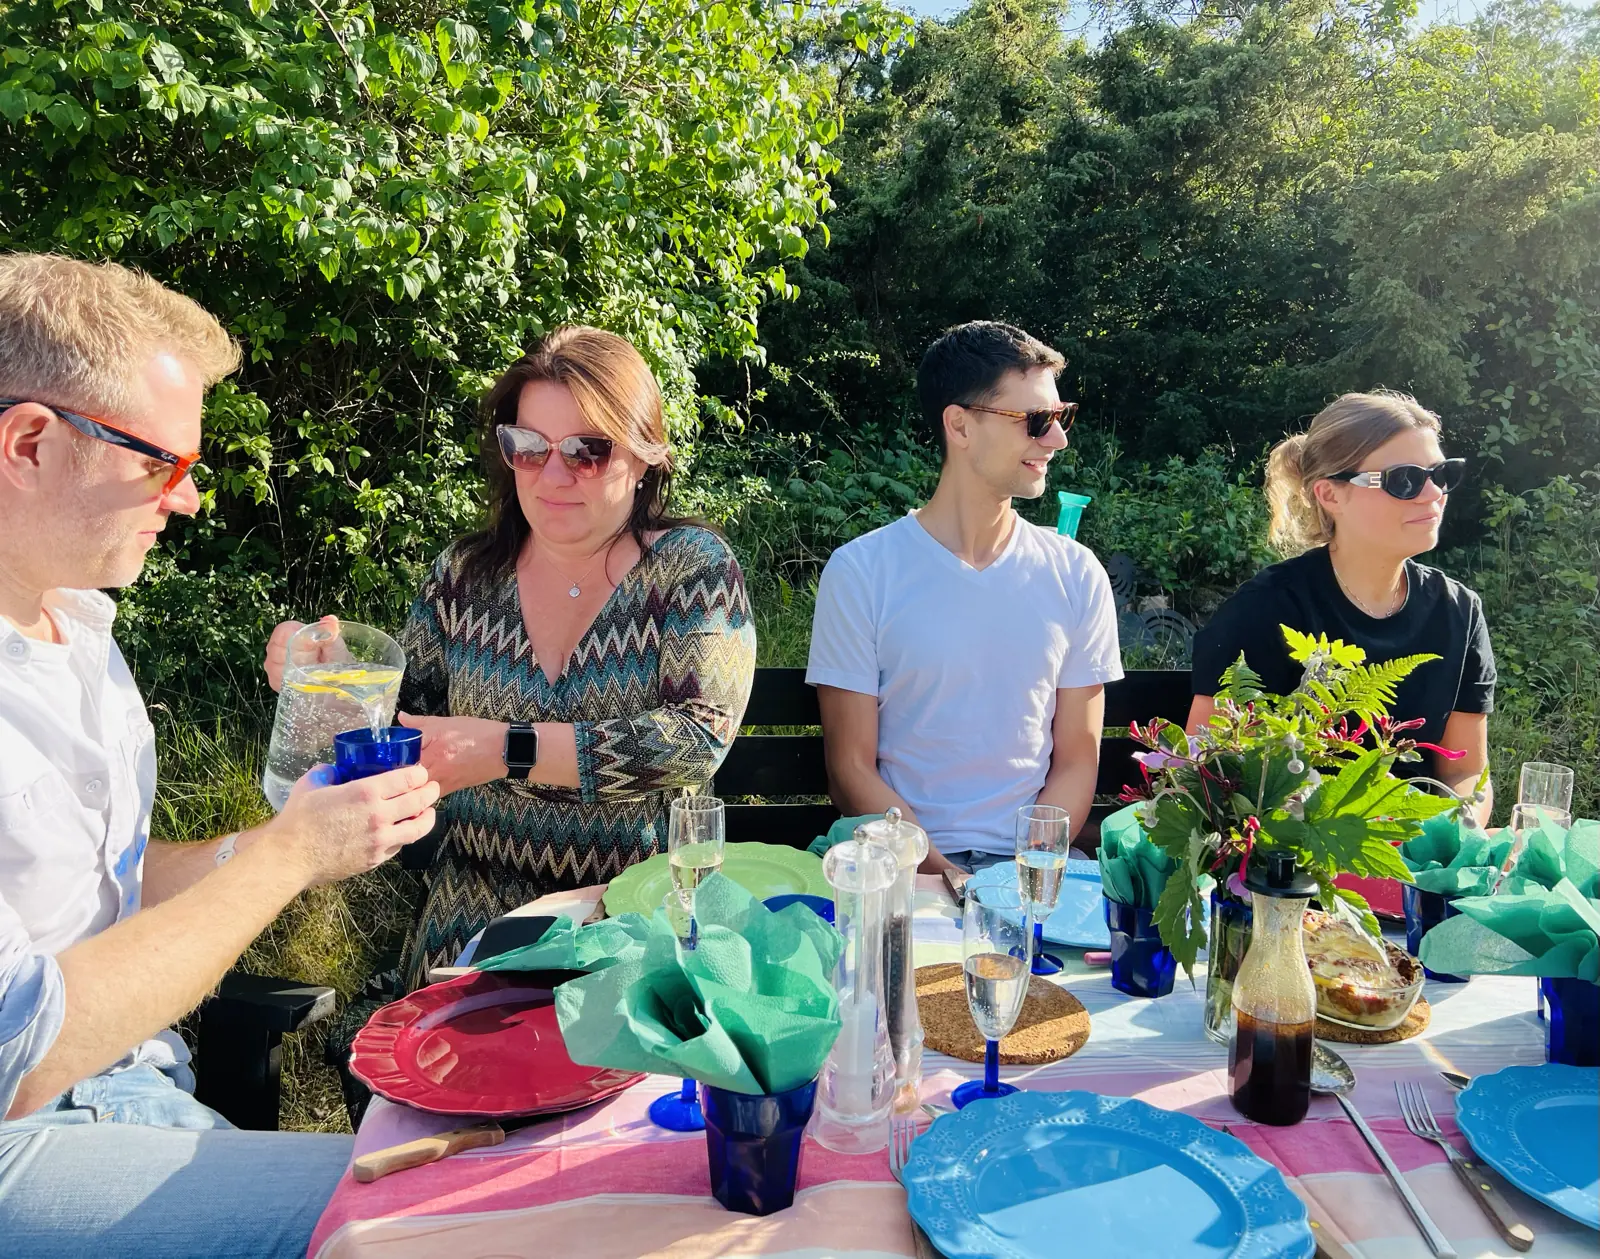 Arthur, Karin, Jeremiah, Vendela sitting at a table outside with brightly colored plates and fresh flowers. It’s sunny and everyone is wearing sunglasses.